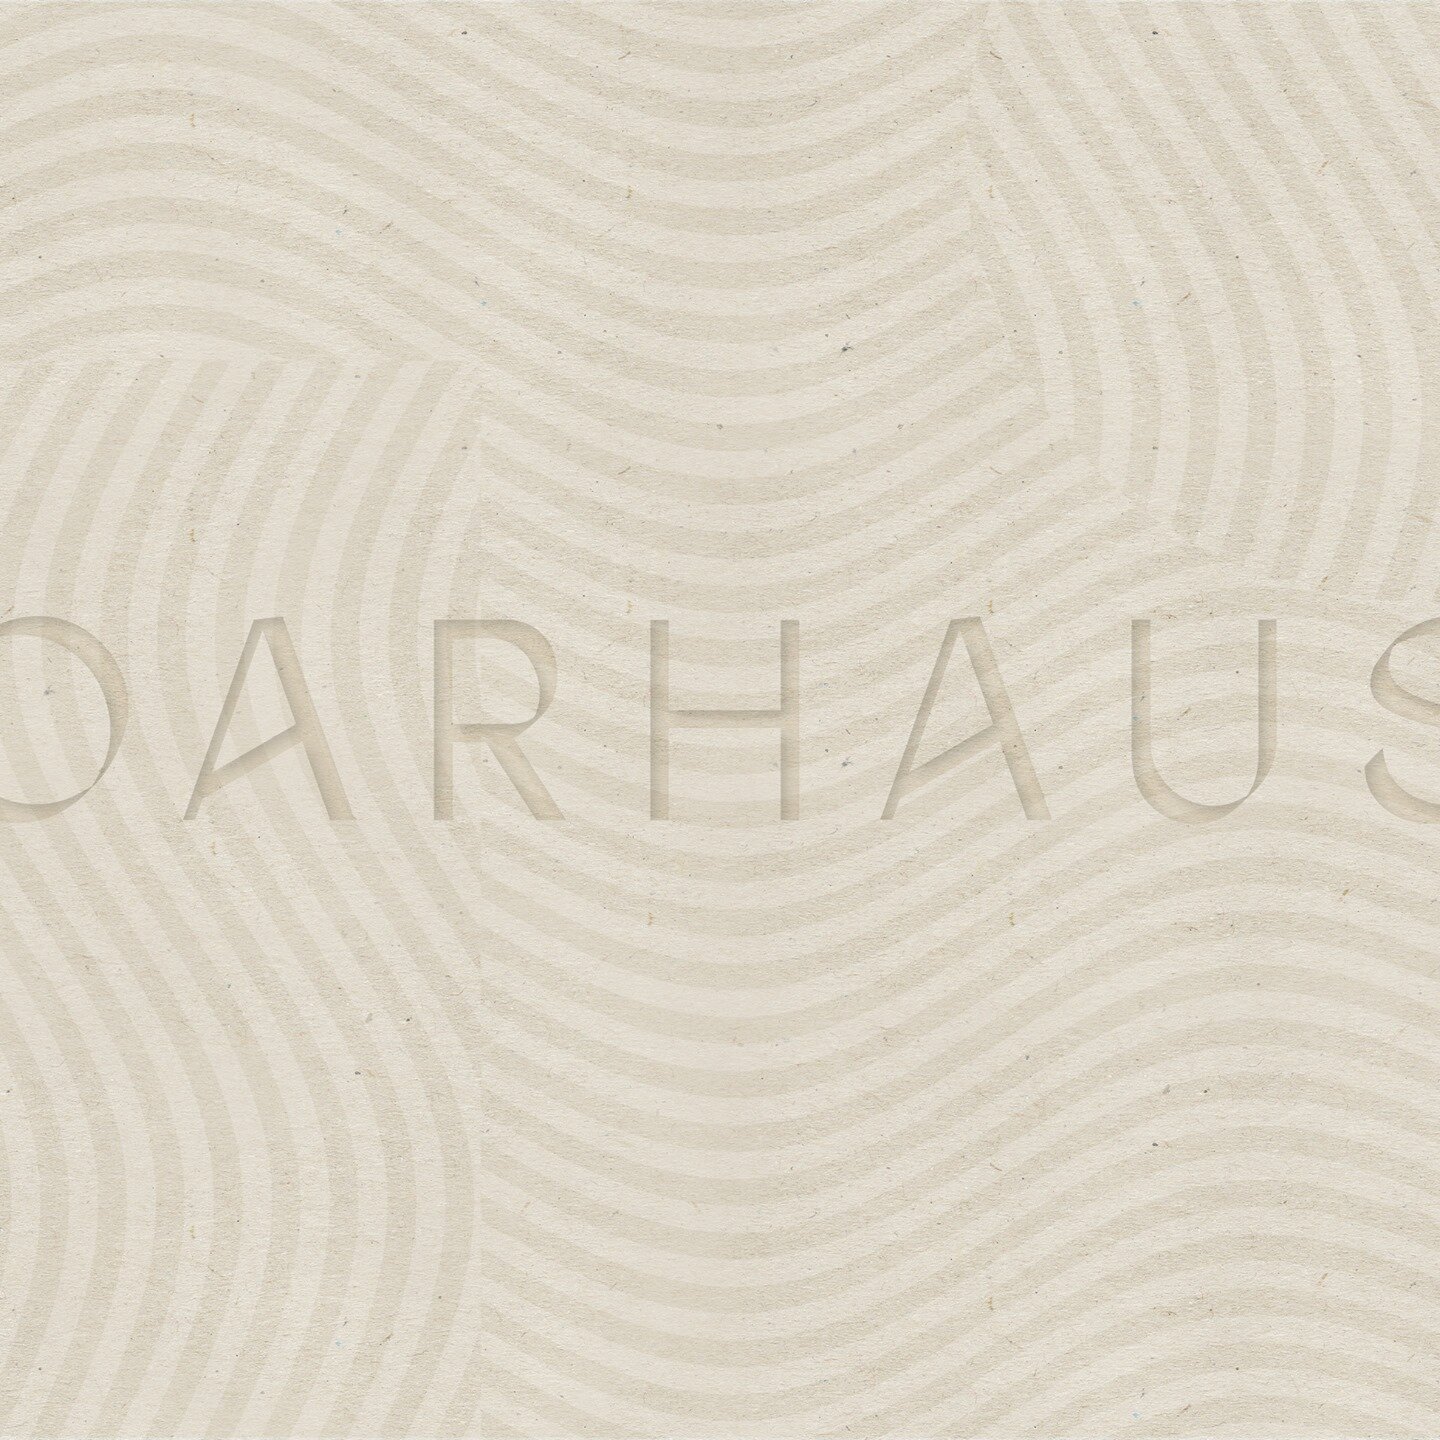 Major shout out and congratulations to @oarhaus for their big launch this week! We love working with Ashleigh (this is her second business after all) and are always excited when she brings us one of her awesome ideas. Ashleigh, you are a badass and w